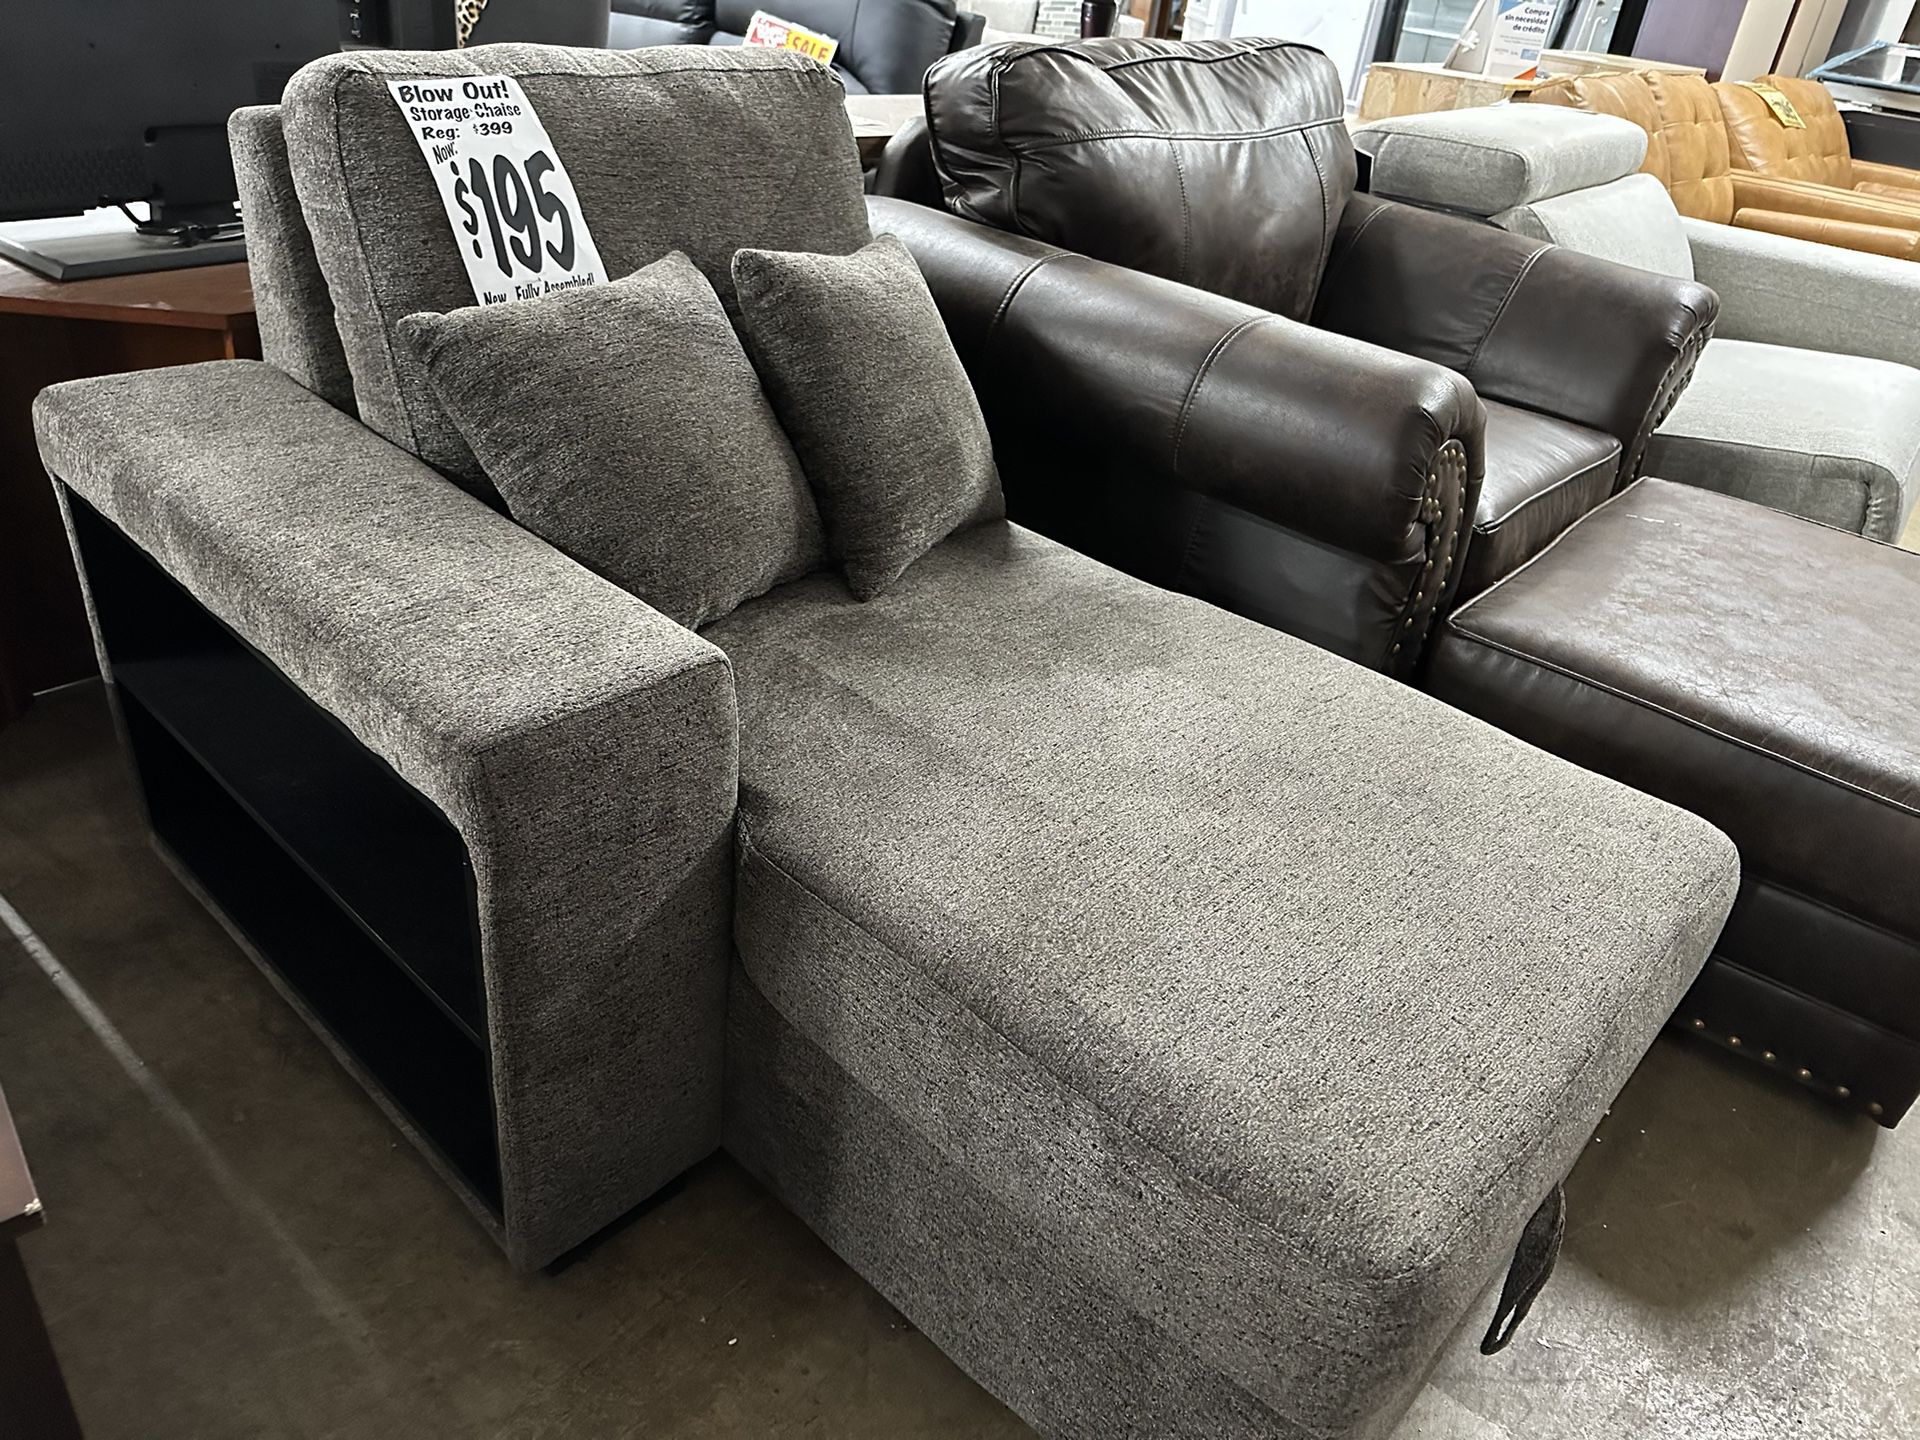 STORAGE Chaise Sofa - BRAND NEW with Storage Under Seating And Built In Shelves On Side!  Rich Gray Fabric (Reg. $400)